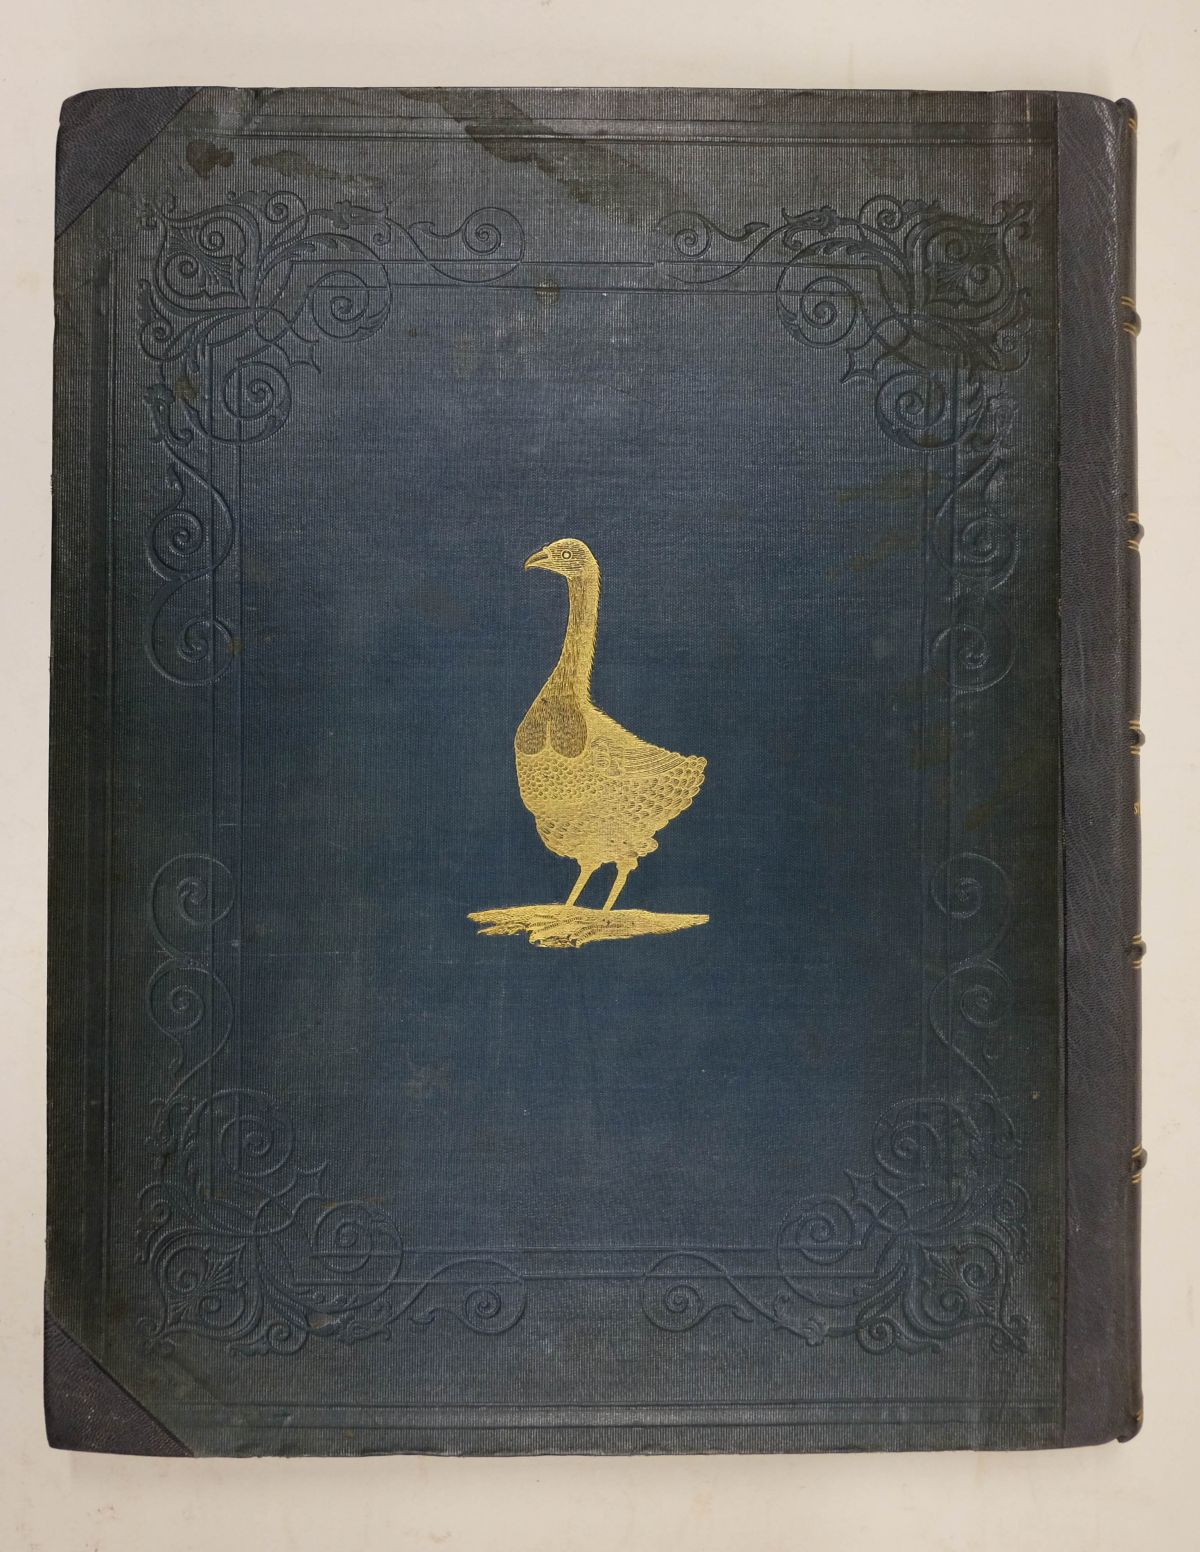 Strickland (Hugh Edwin). The Dodo and its Kindred, 1st edition, 1848 - Image 4 of 8